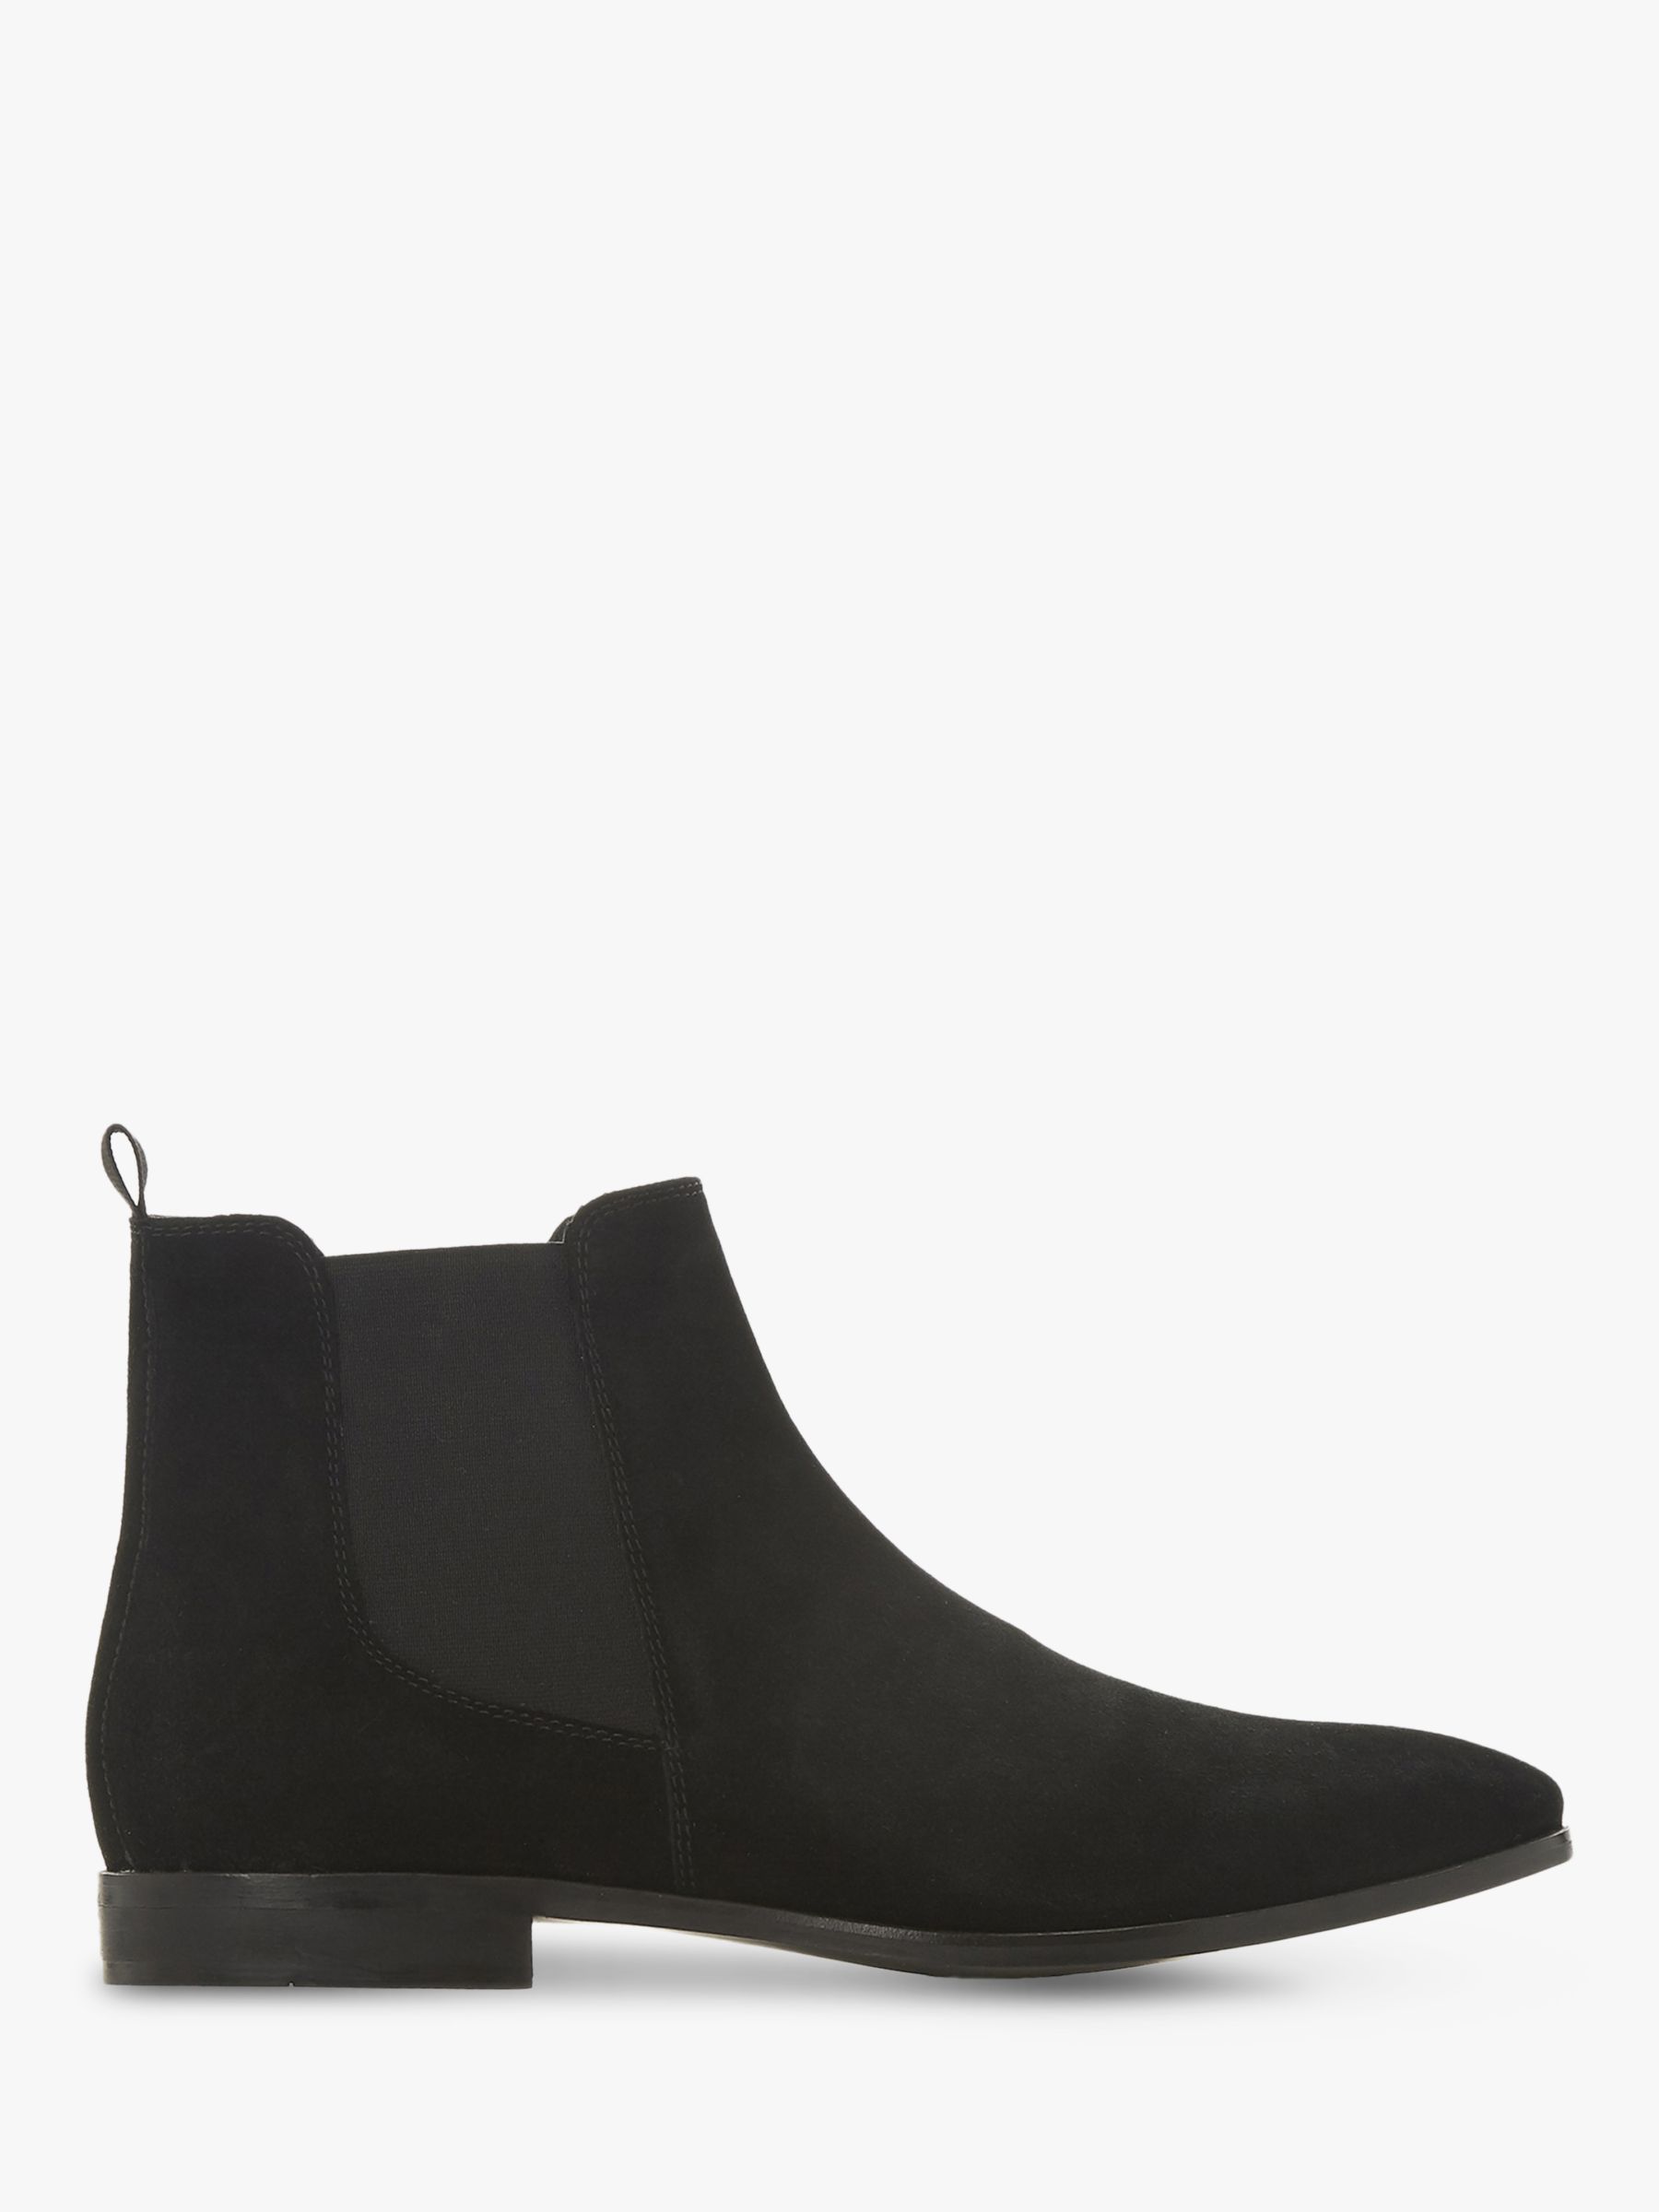 Dune Mayweather Suede Chisel Toe Chelsea Boots